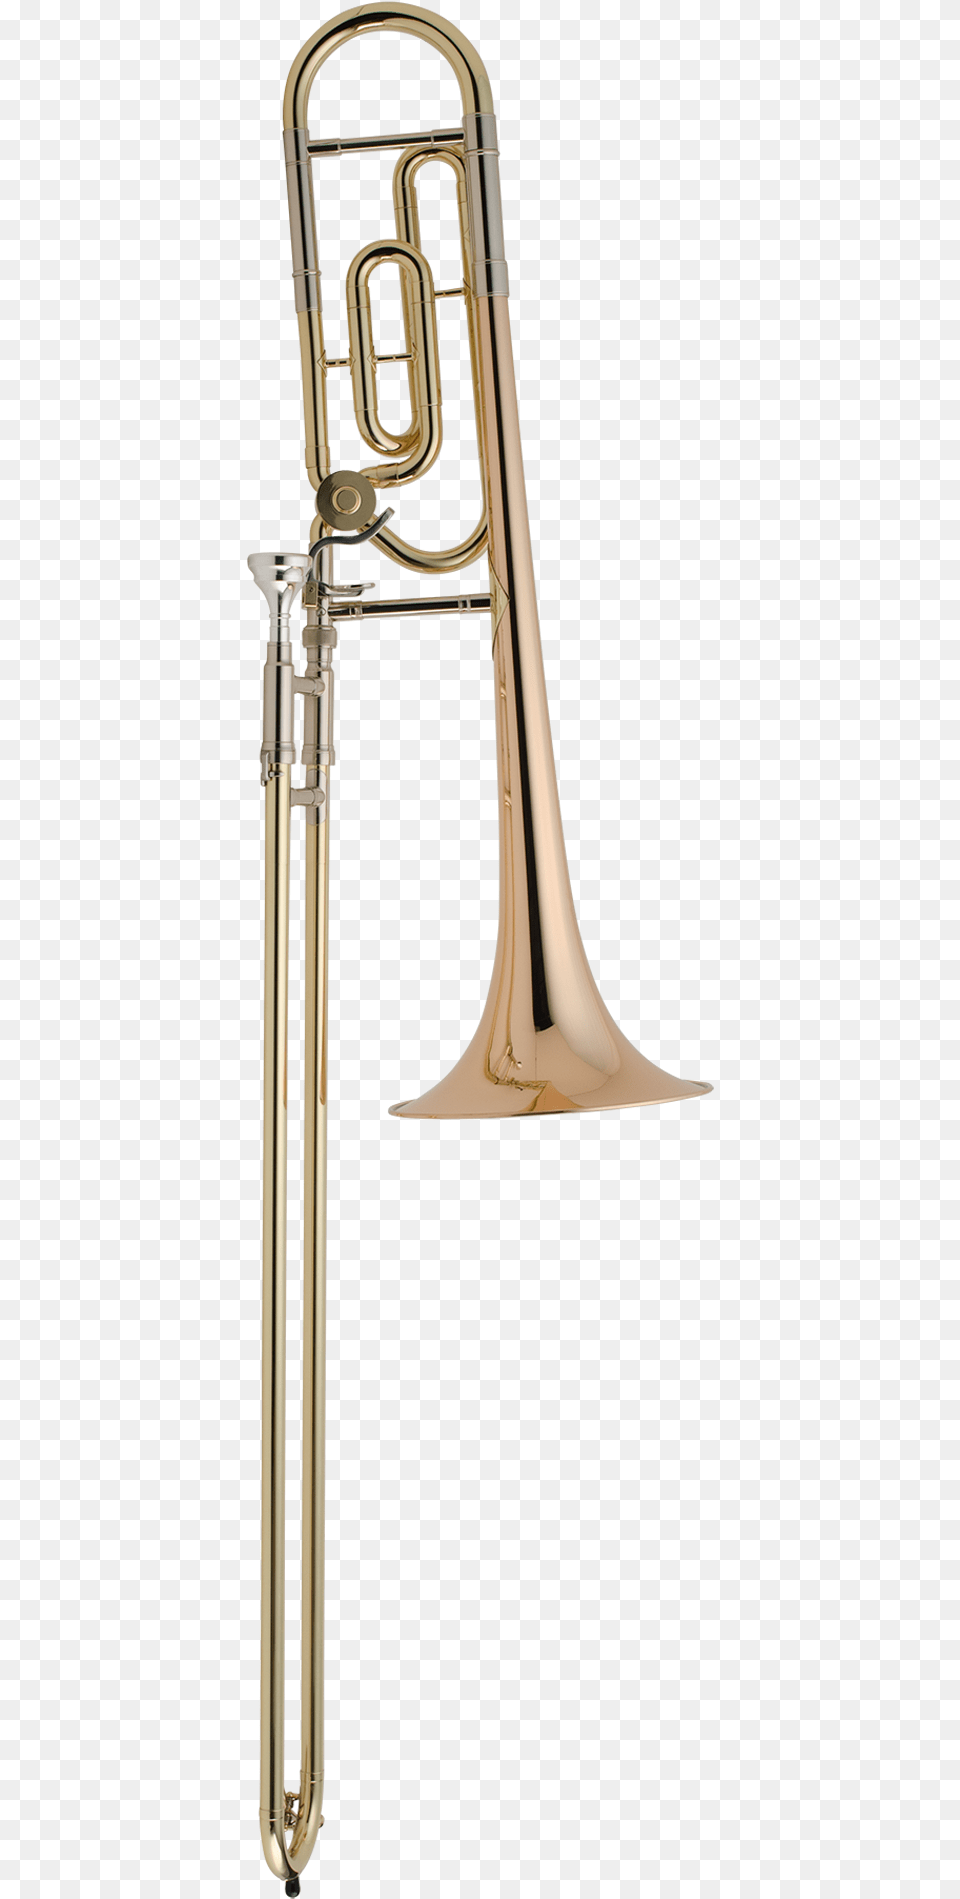 King Step Up Model 608f Tenor Trombone King 608f Trombone, Musical Instrument, Brass Section Free Transparent Png